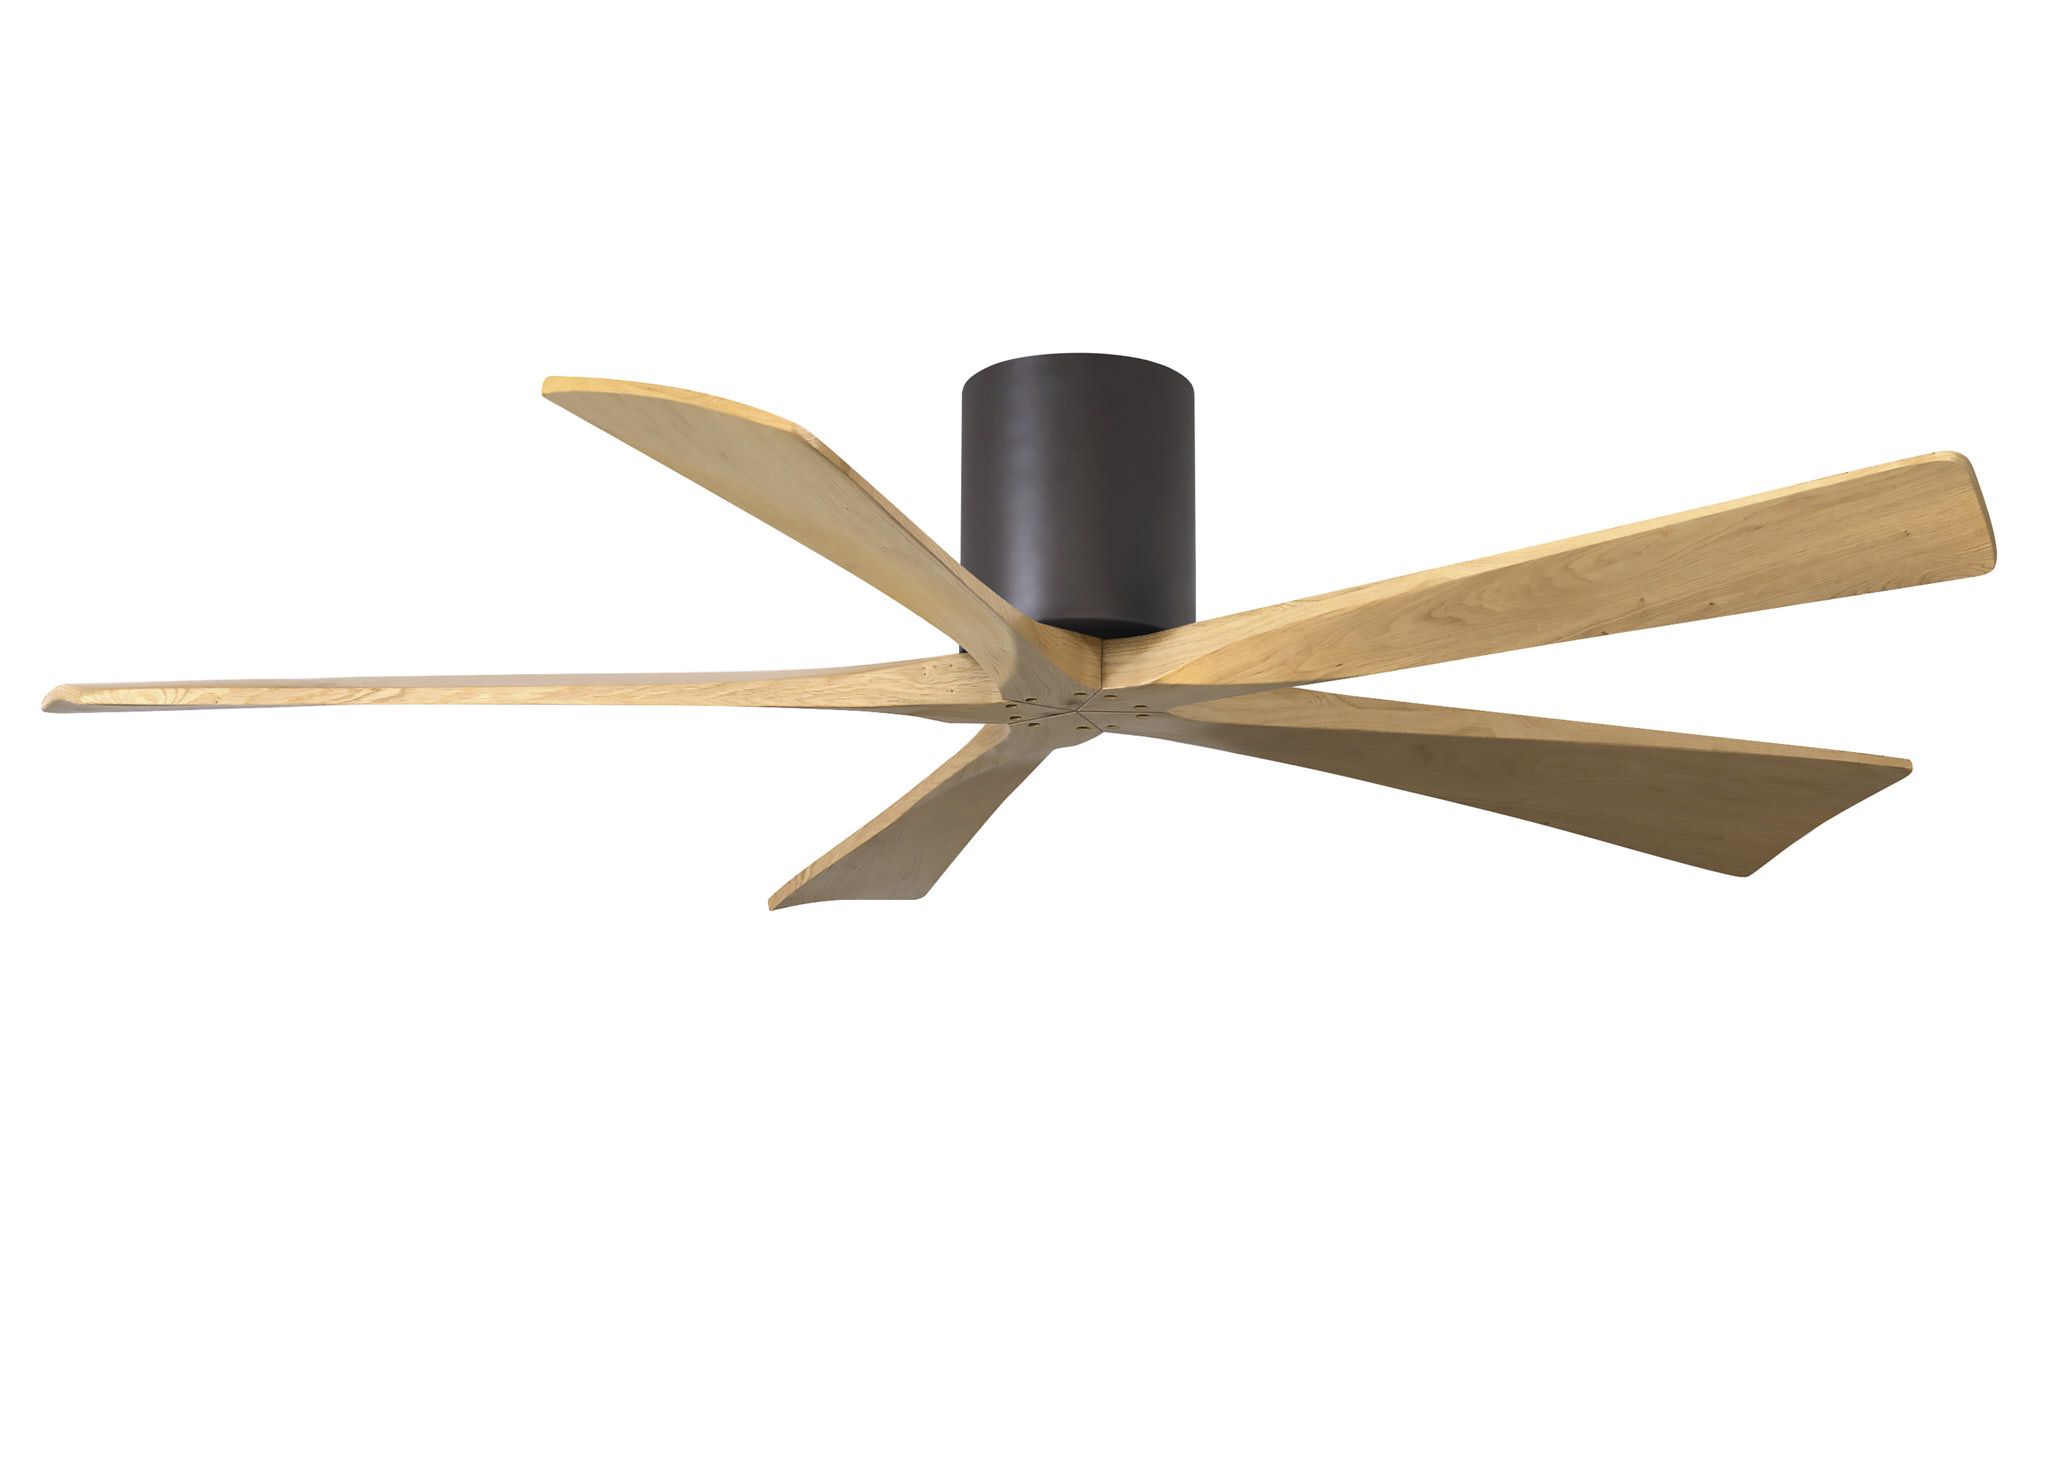 Irene-5H 6-speed ceiling fan in textured bronze finish with 60